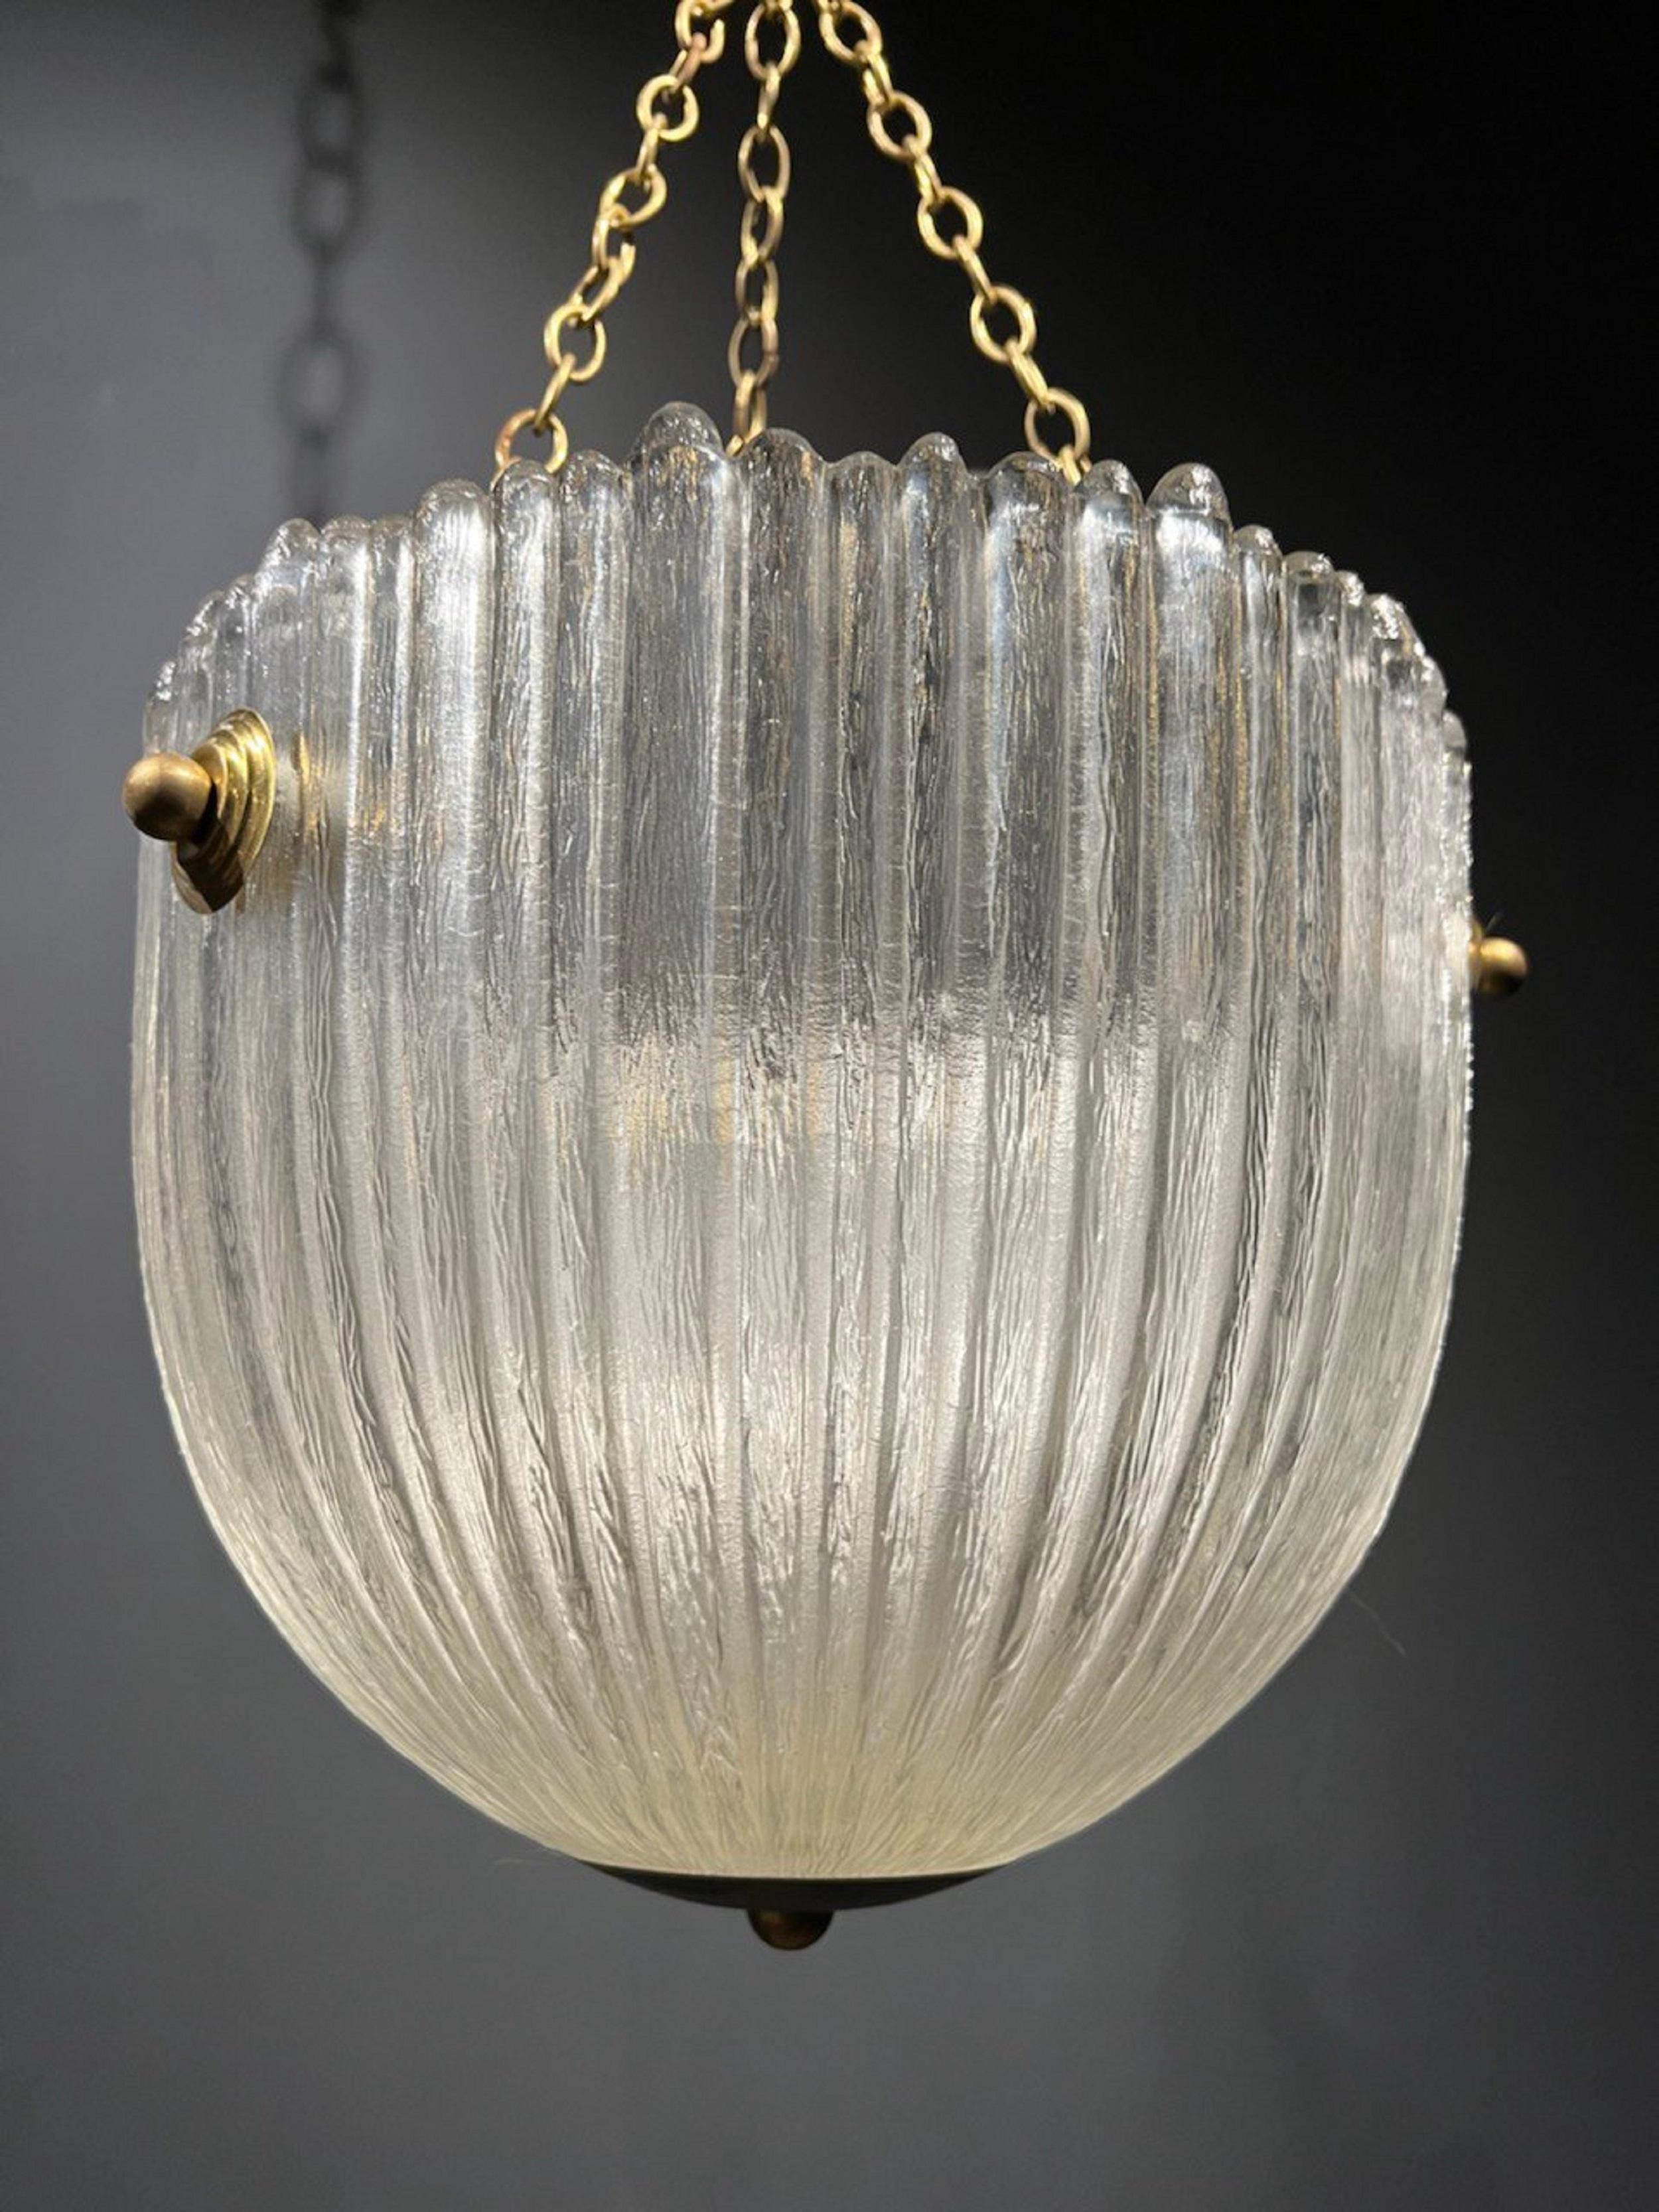 1930s Domed French Molded Glass Light Fixture For Sale 1